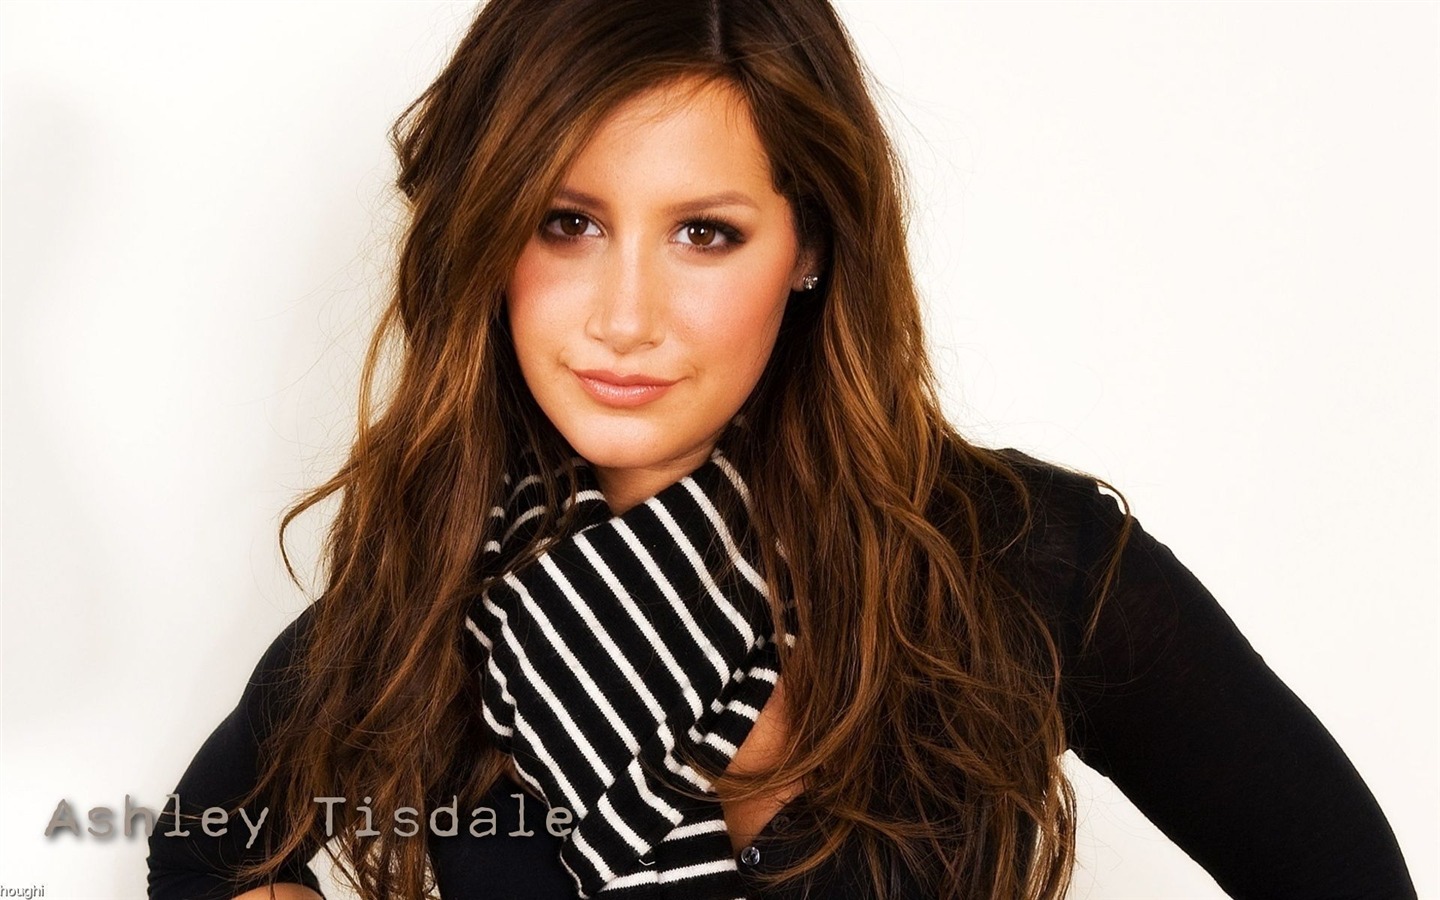 Ashley Tisdale #063 - 1440x900 Wallpapers Pictures Photos Images